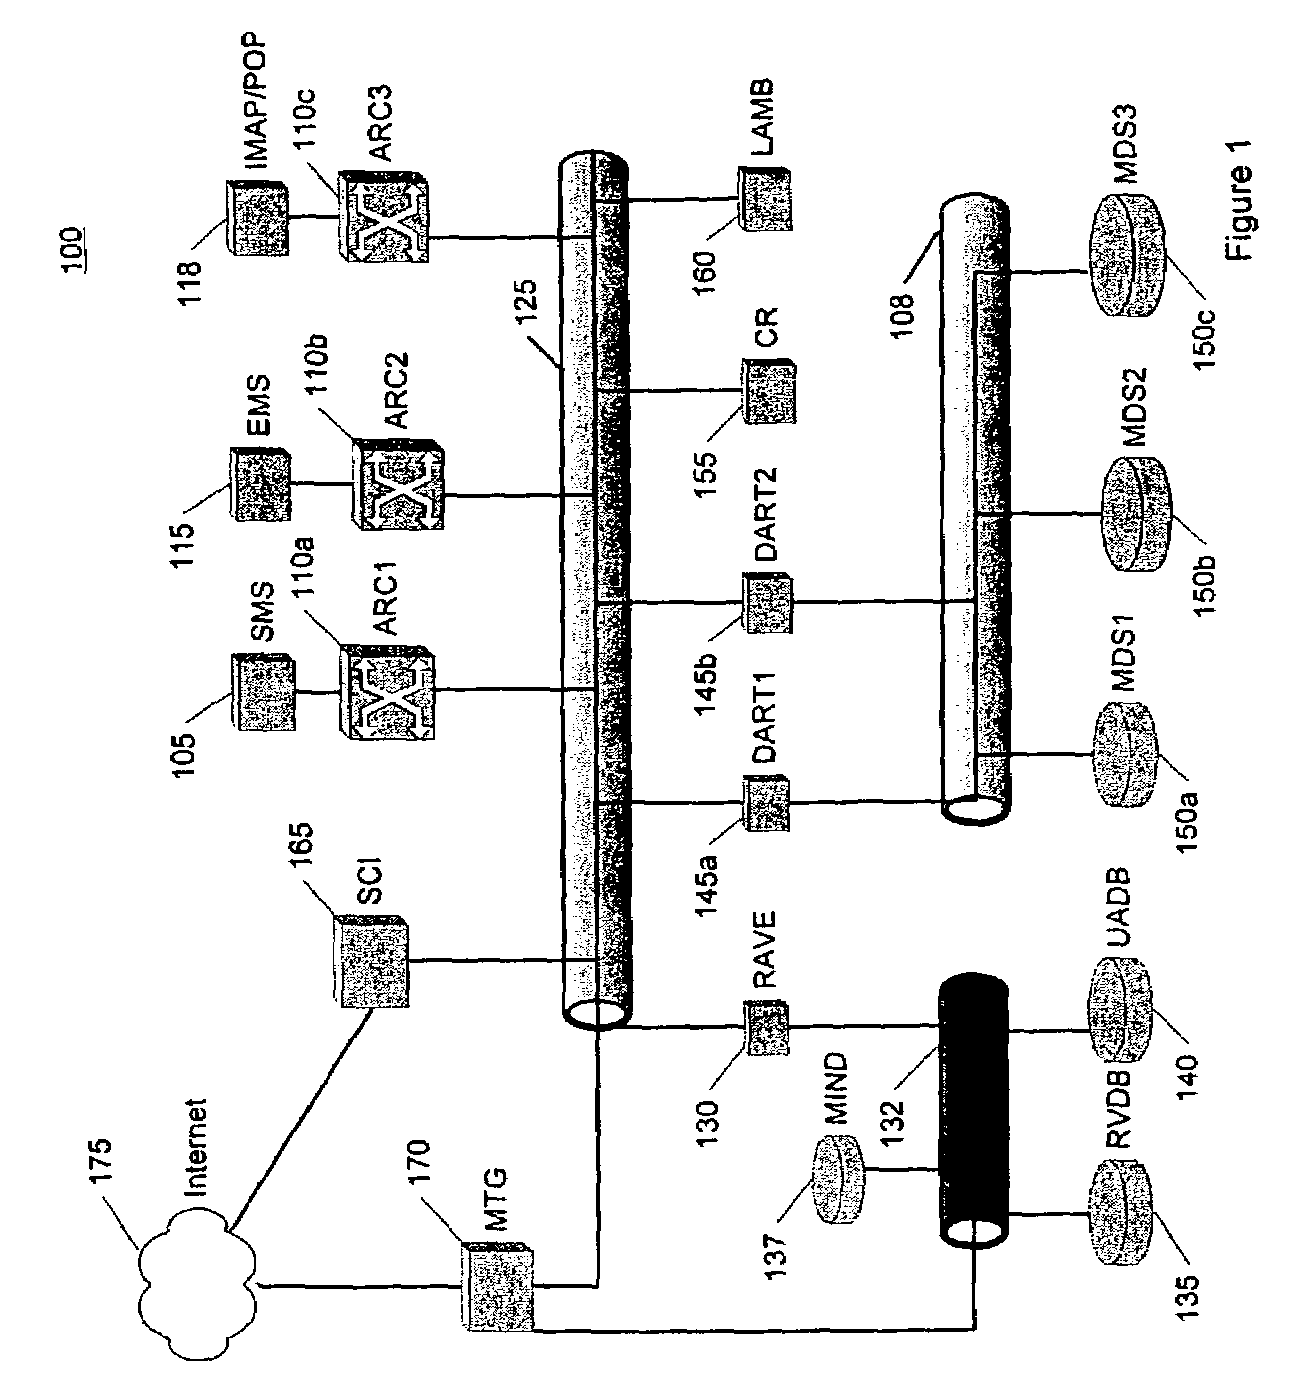 System for translation and communication of messaging protocols into a common protocol